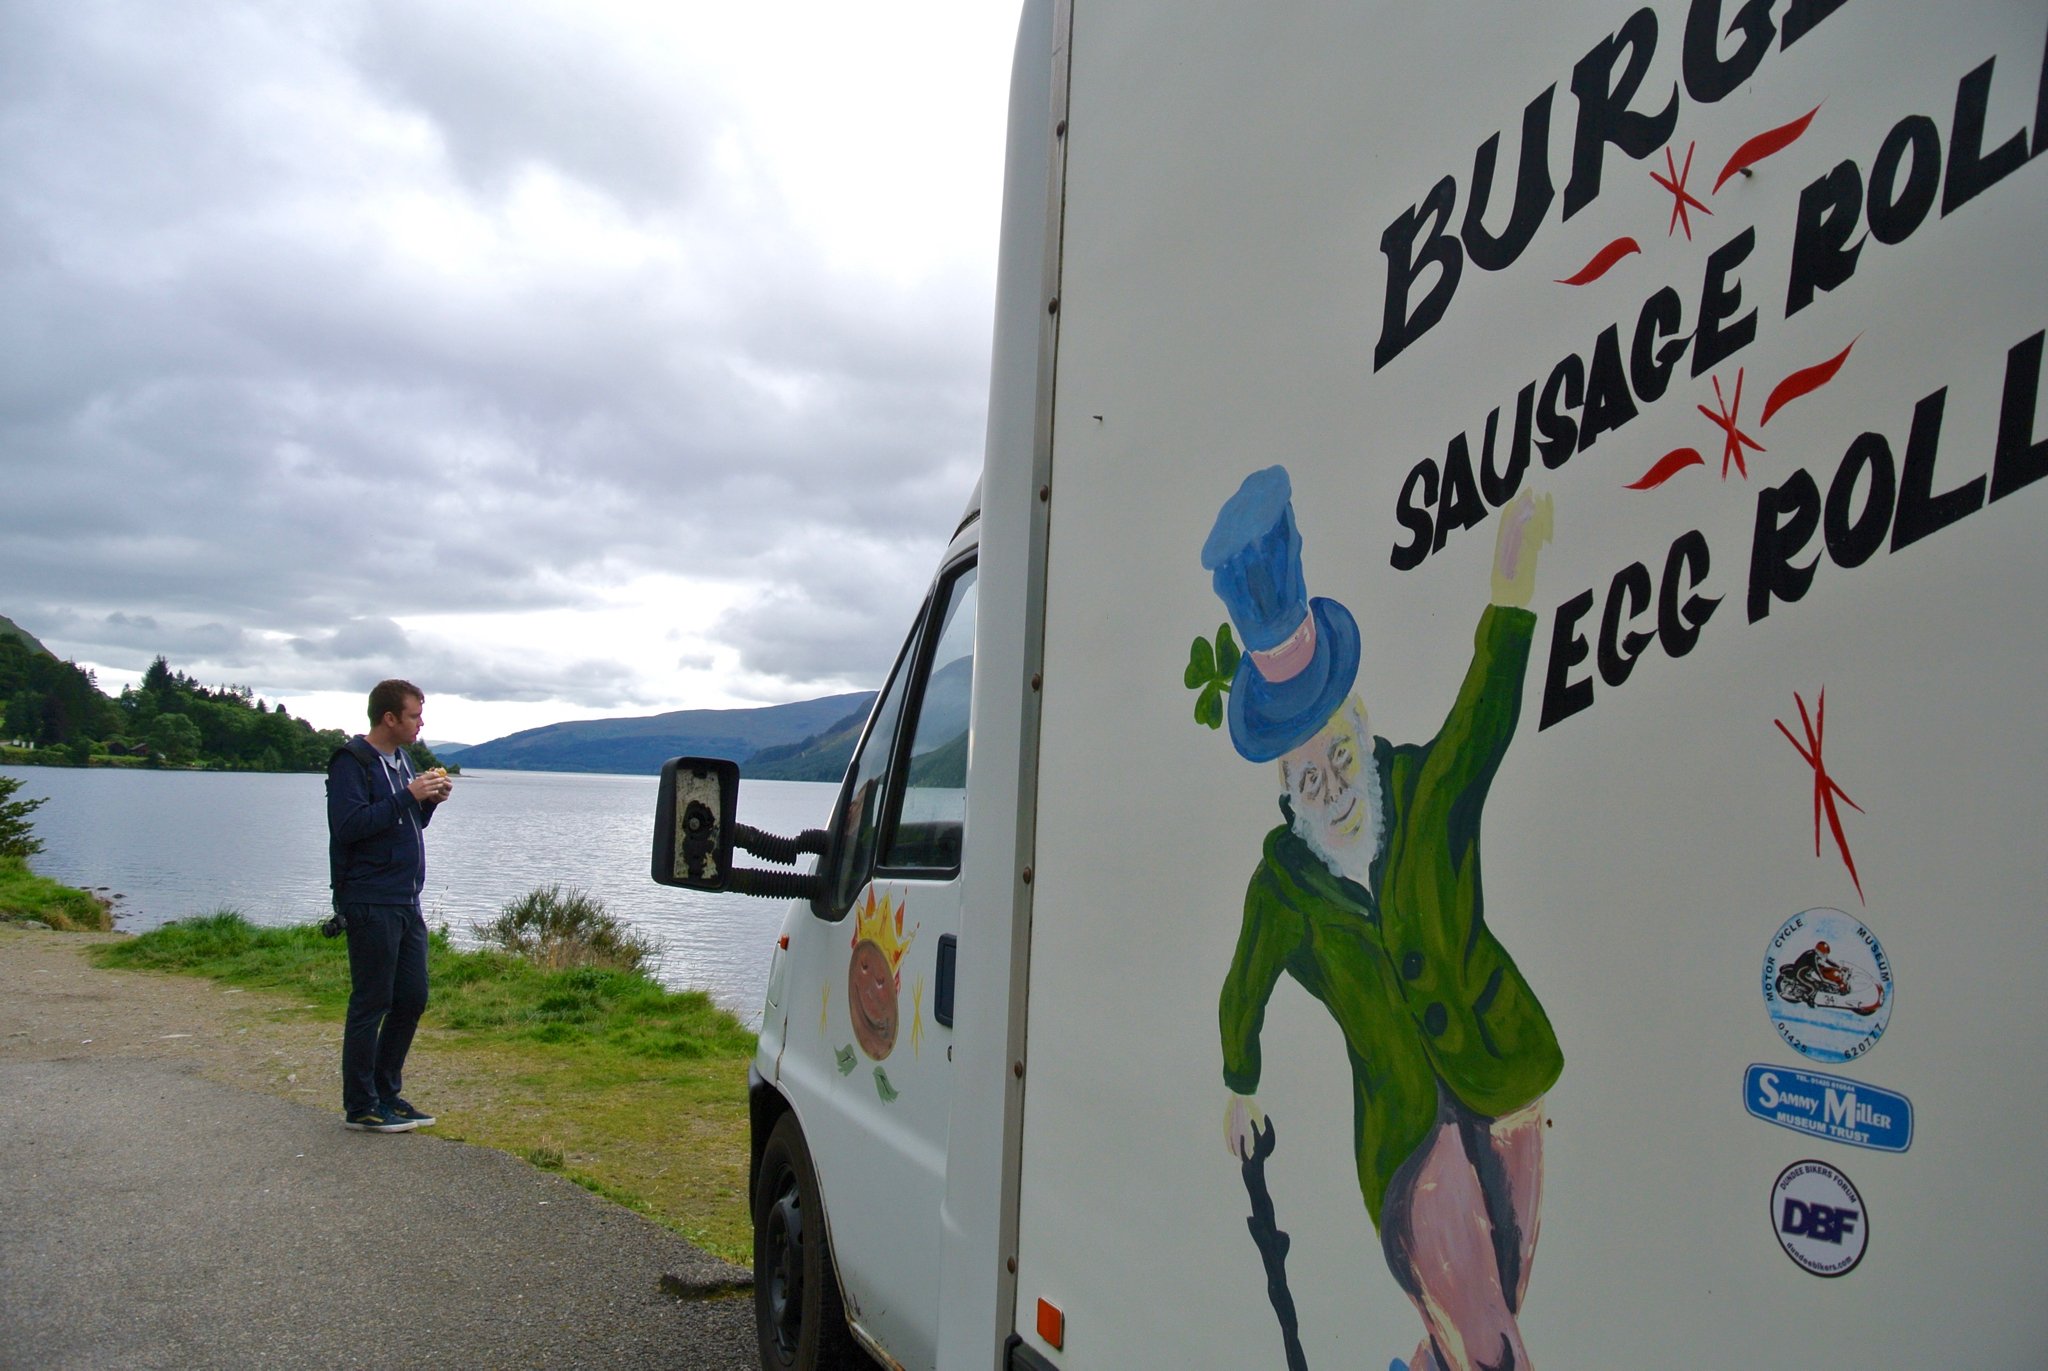 Stopping for lunch at the Burger Queen food truck on Loch Lochy